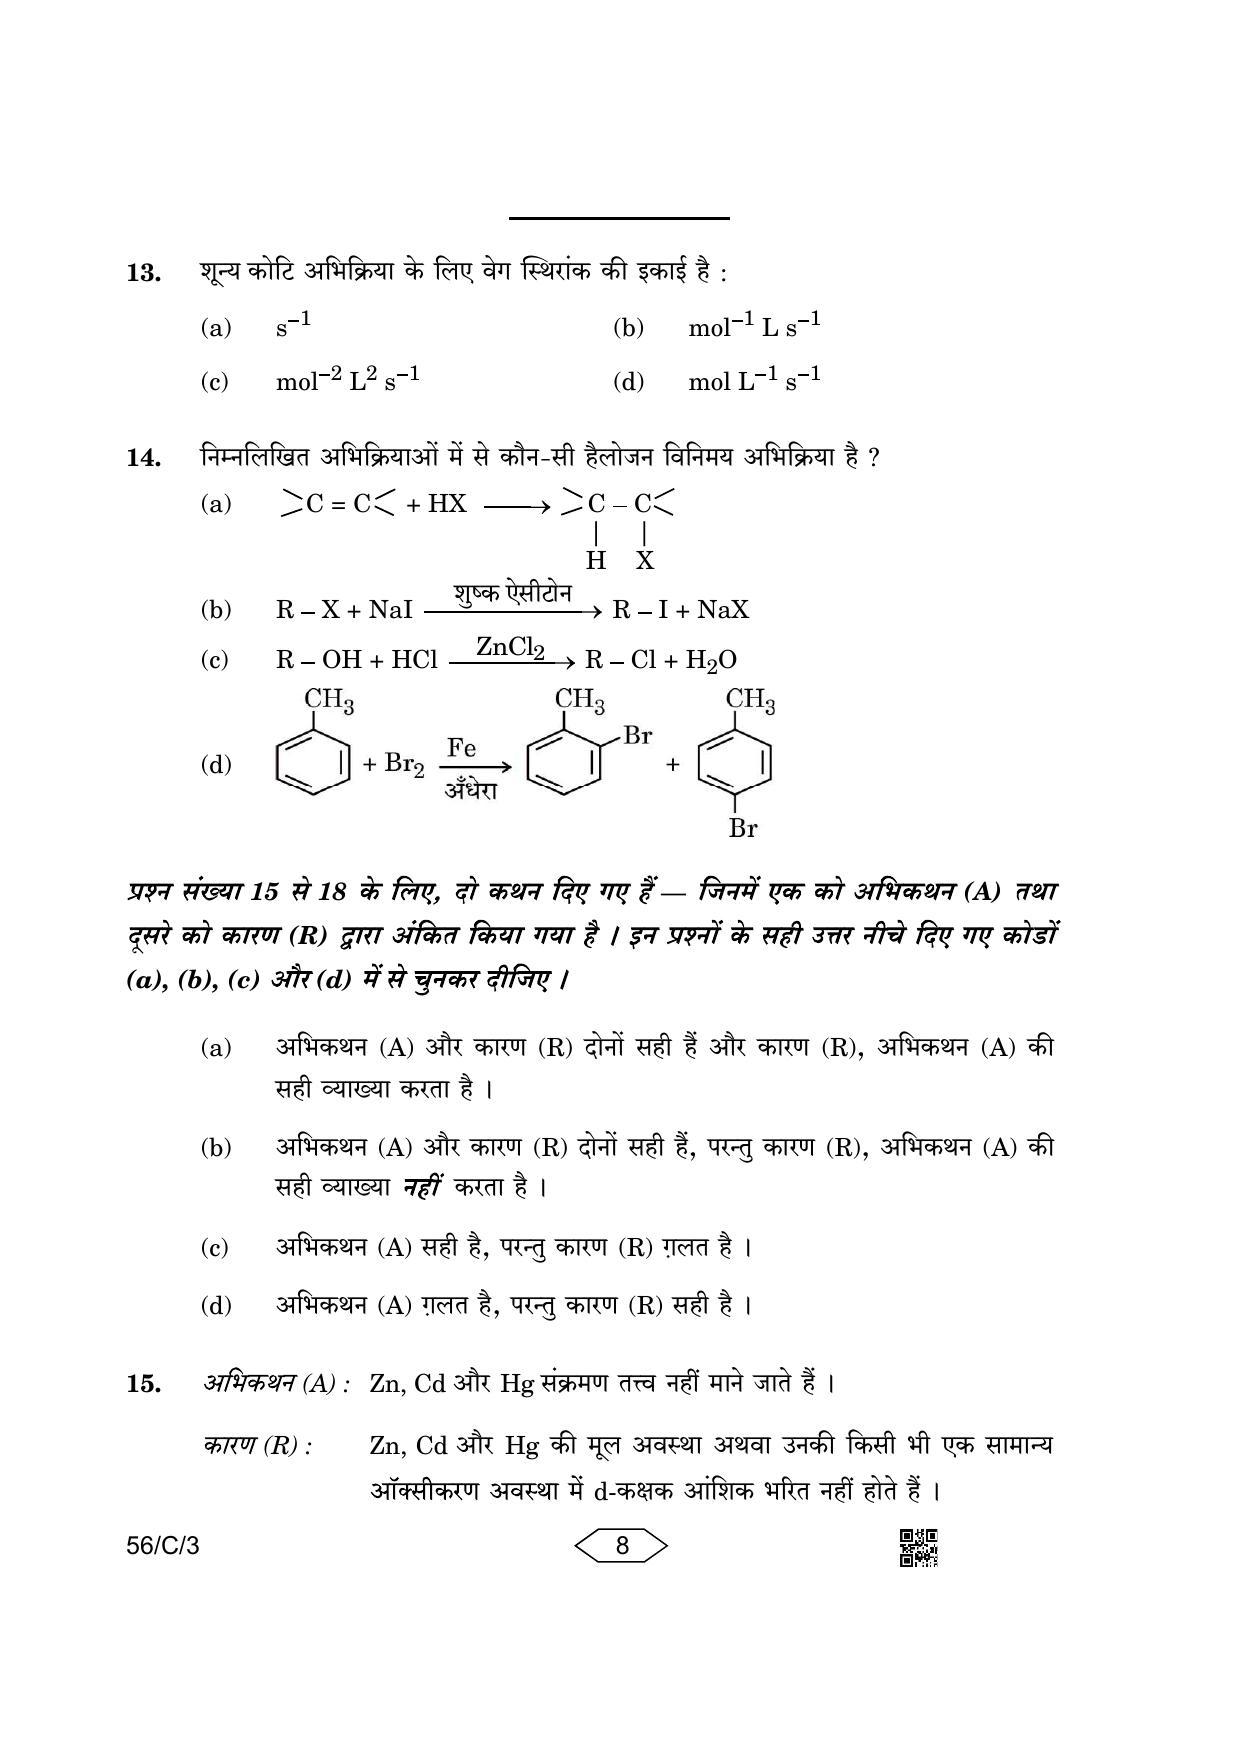 CBSE Class 12 56-3 Chemistry 2023 (Compartment) Question Paper - Page 8